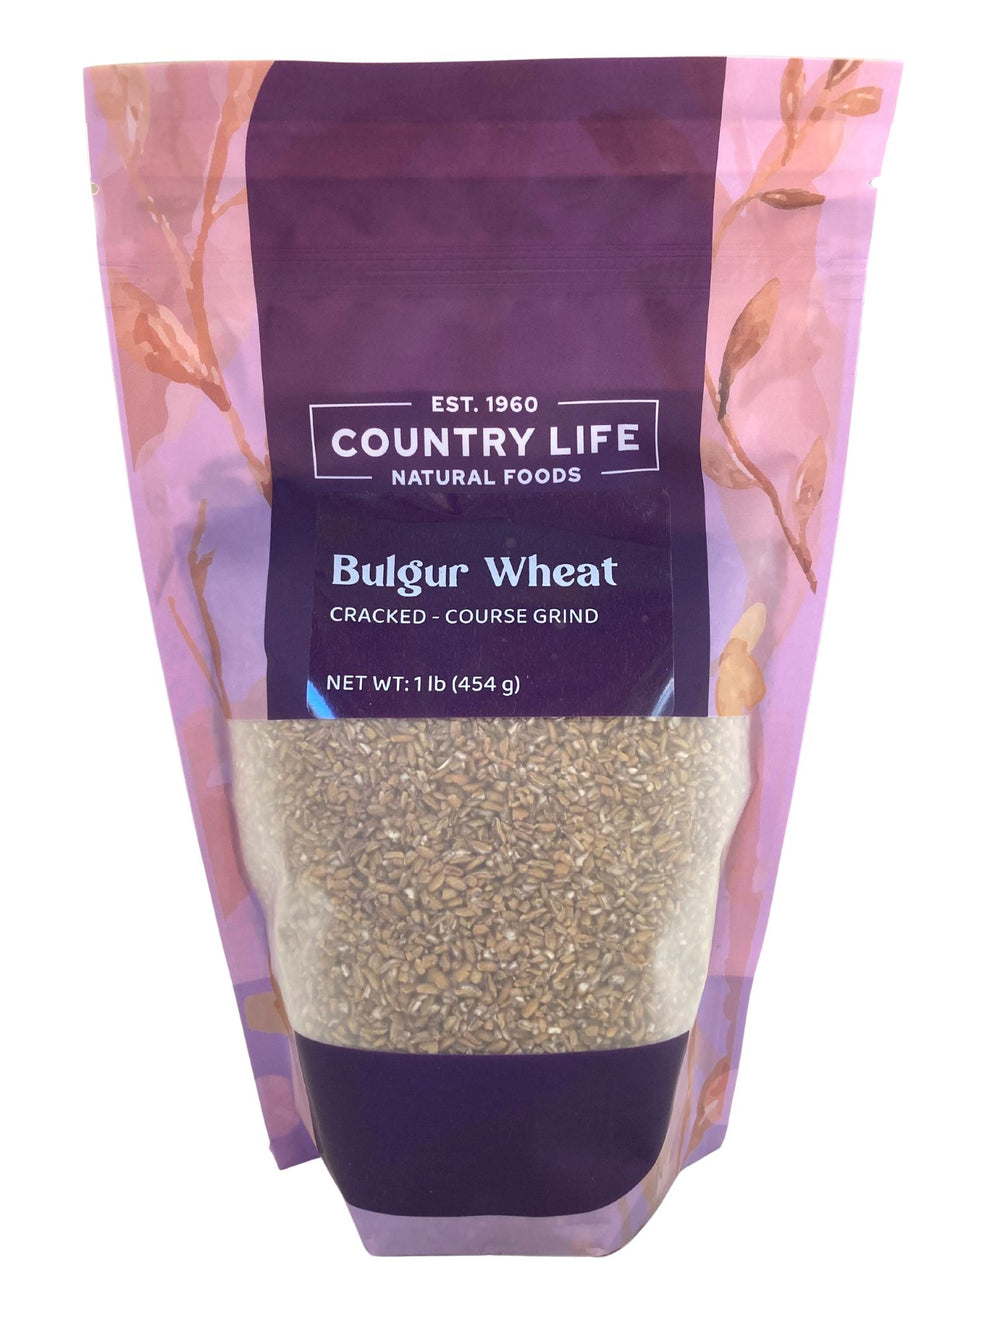 Bulgar Wheat, Cracked (Course Grind) - Country Life Natural Foods